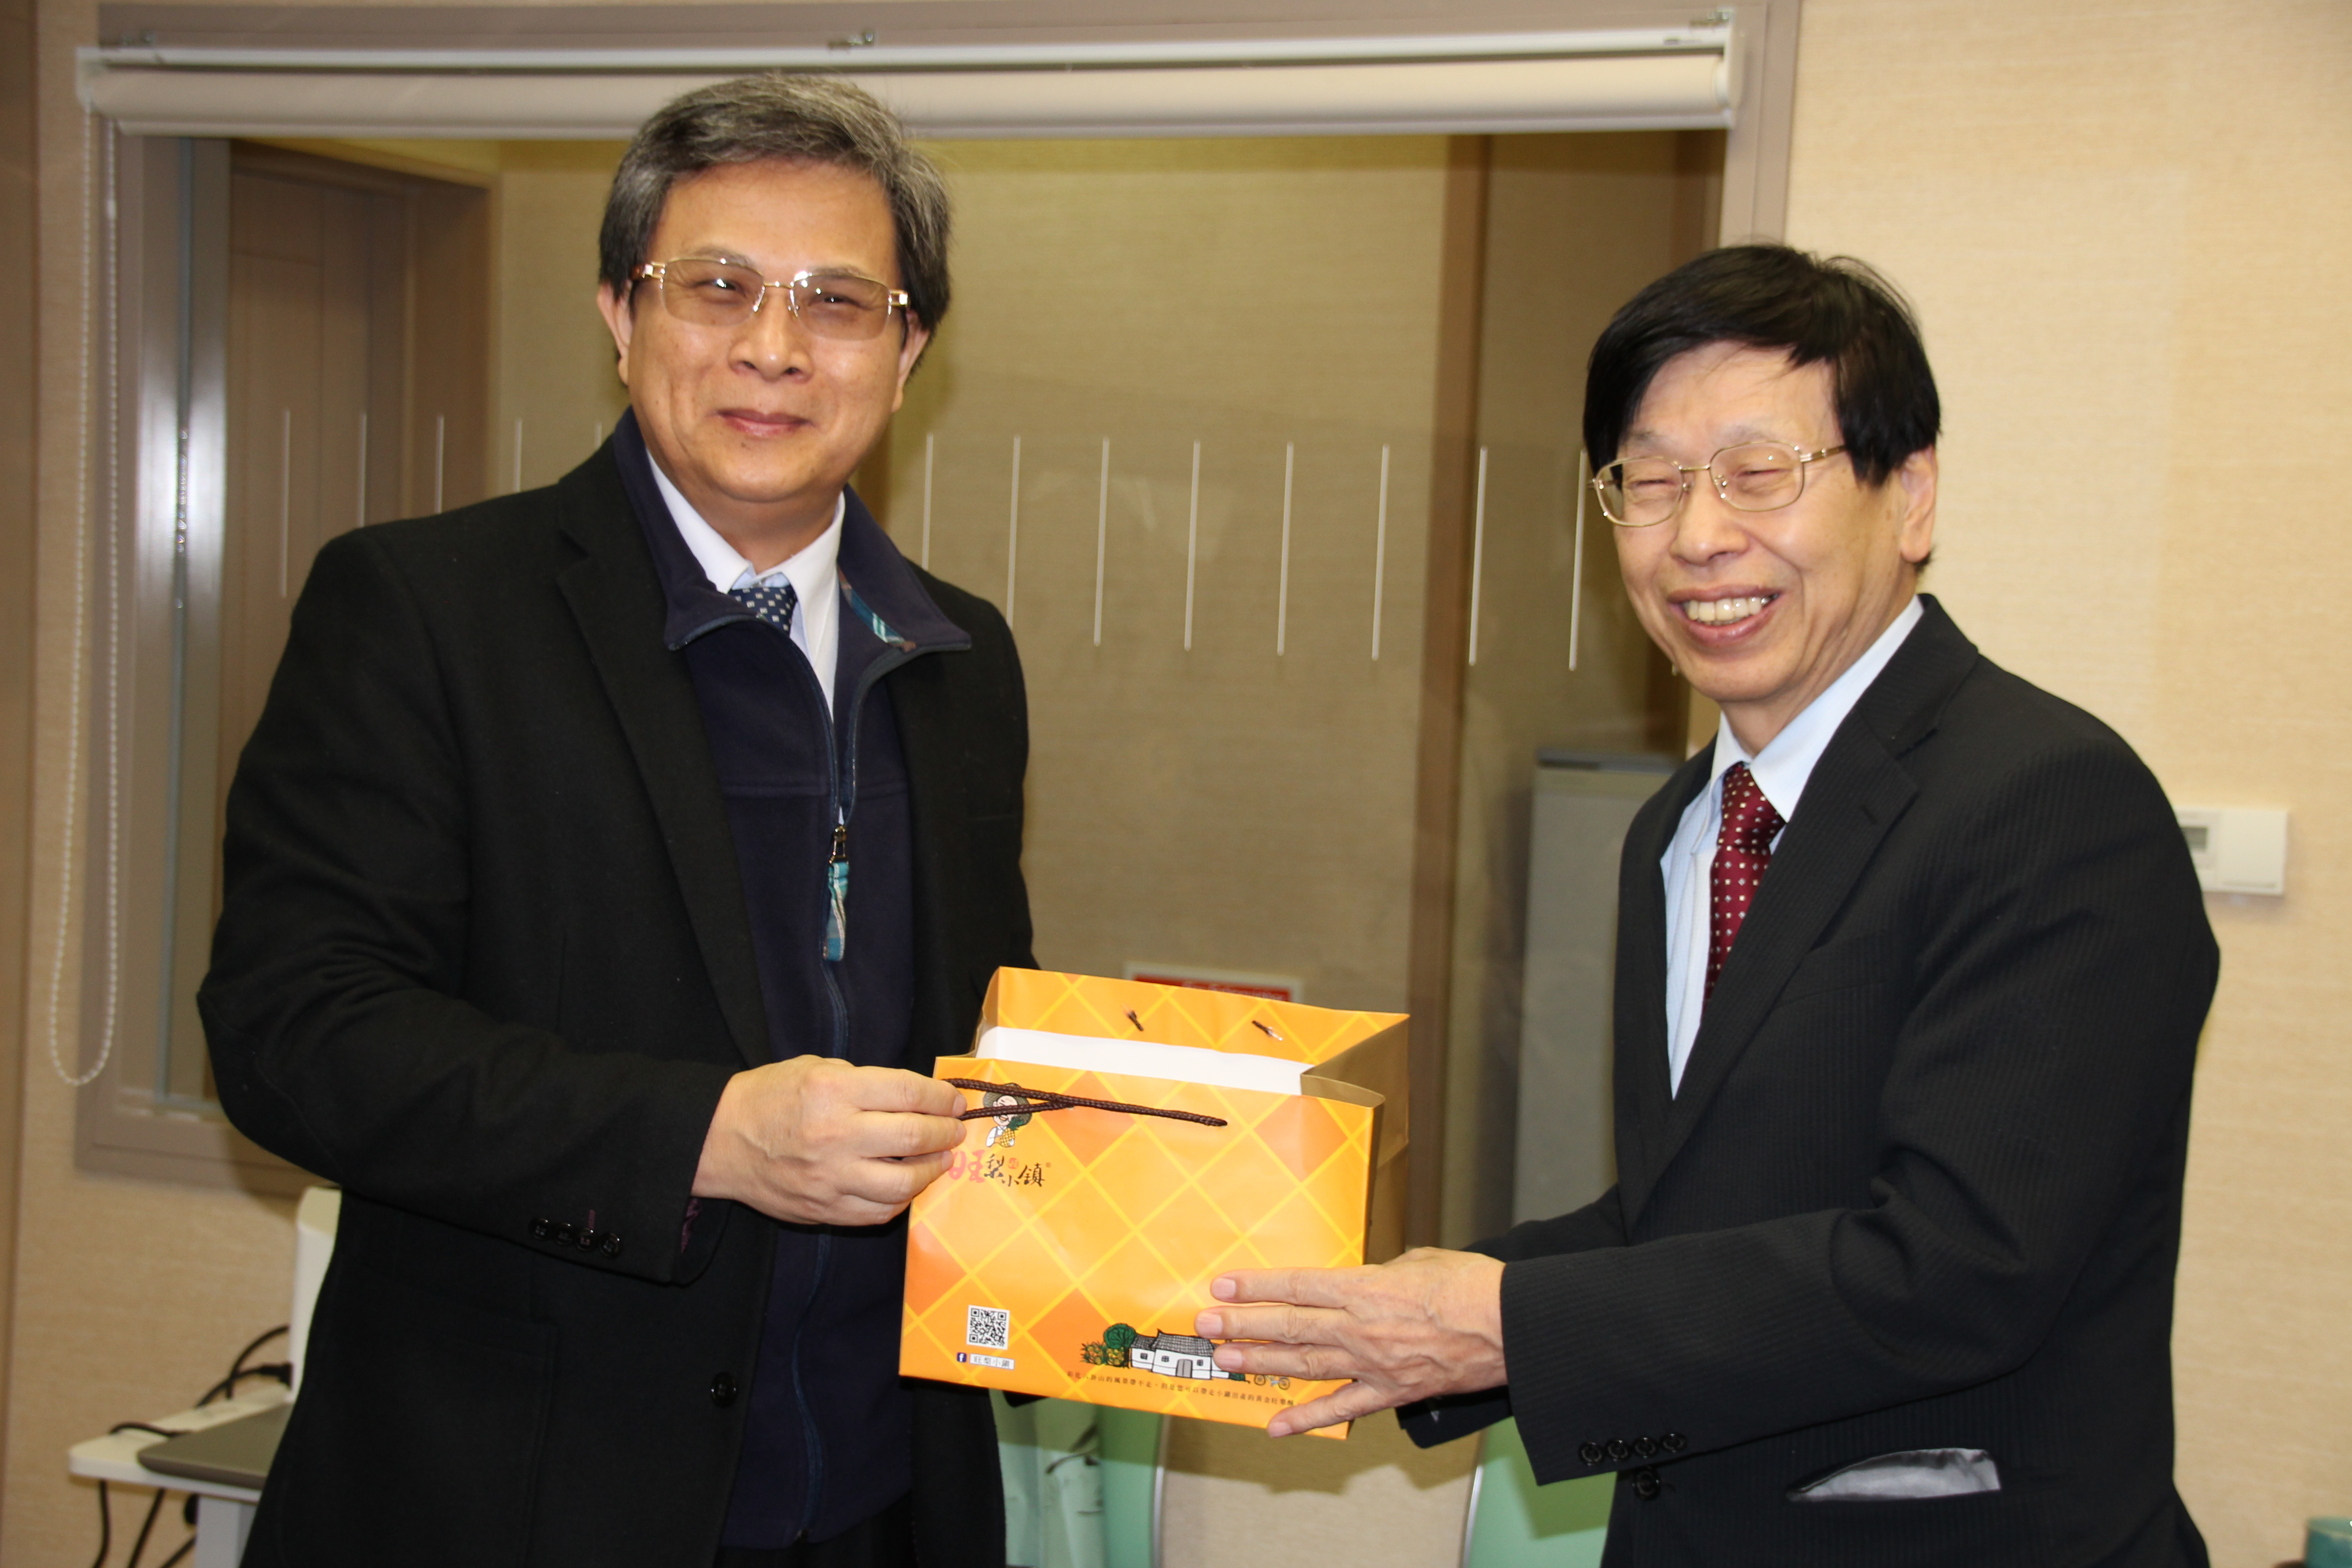 Delegation from Chaoyang University of Technology (Taiwan) visited UoA